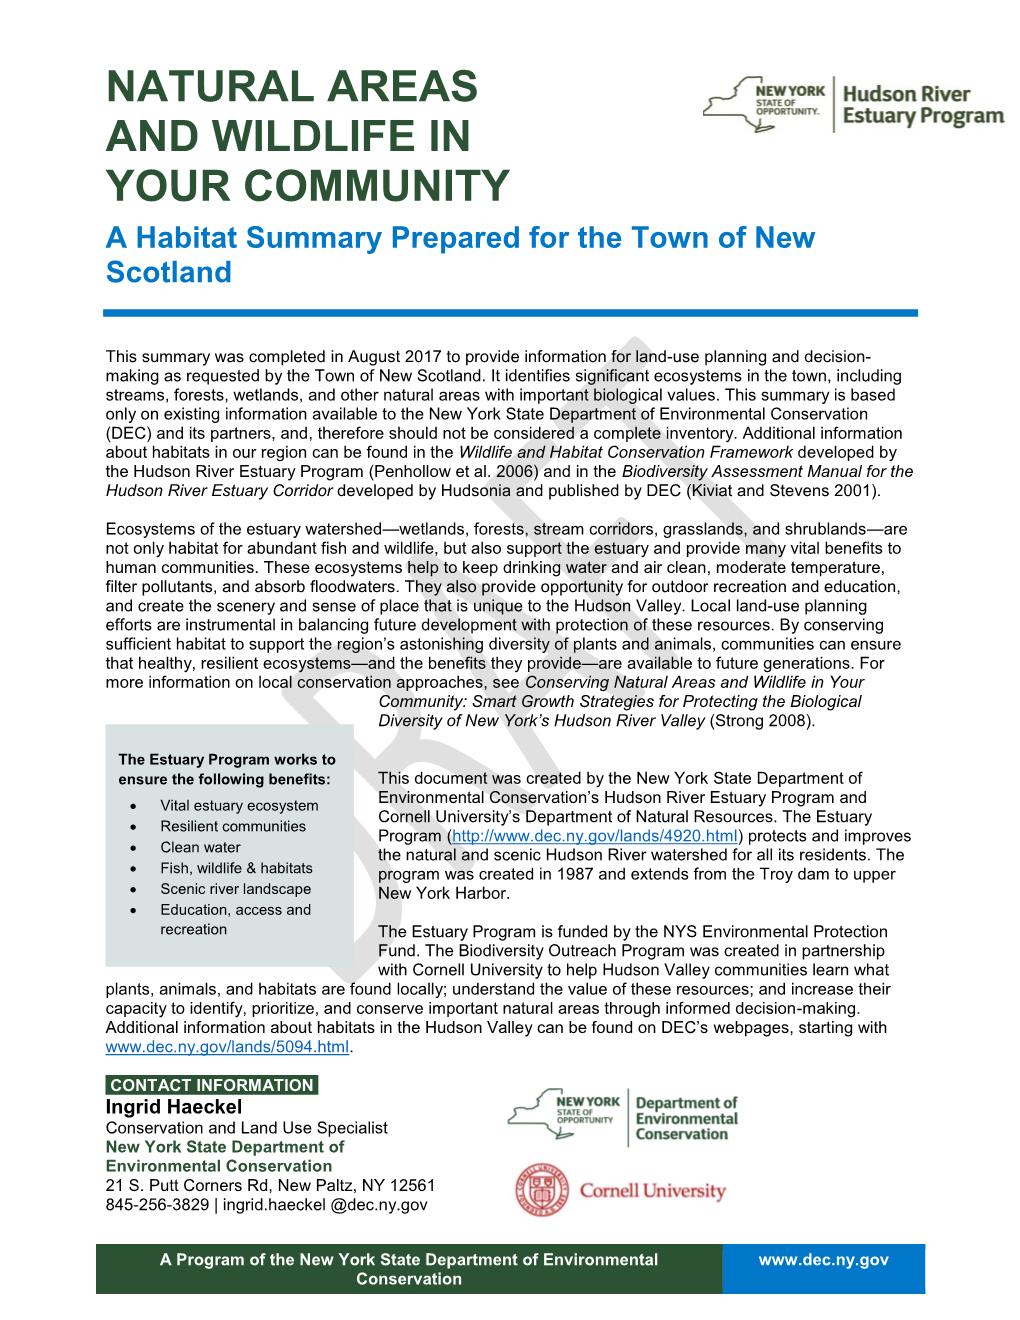 NATURAL AREAS and WILDLIFE in YOUR COMMUNITY a Habitat Summary Prepared for the Town of New Scotland